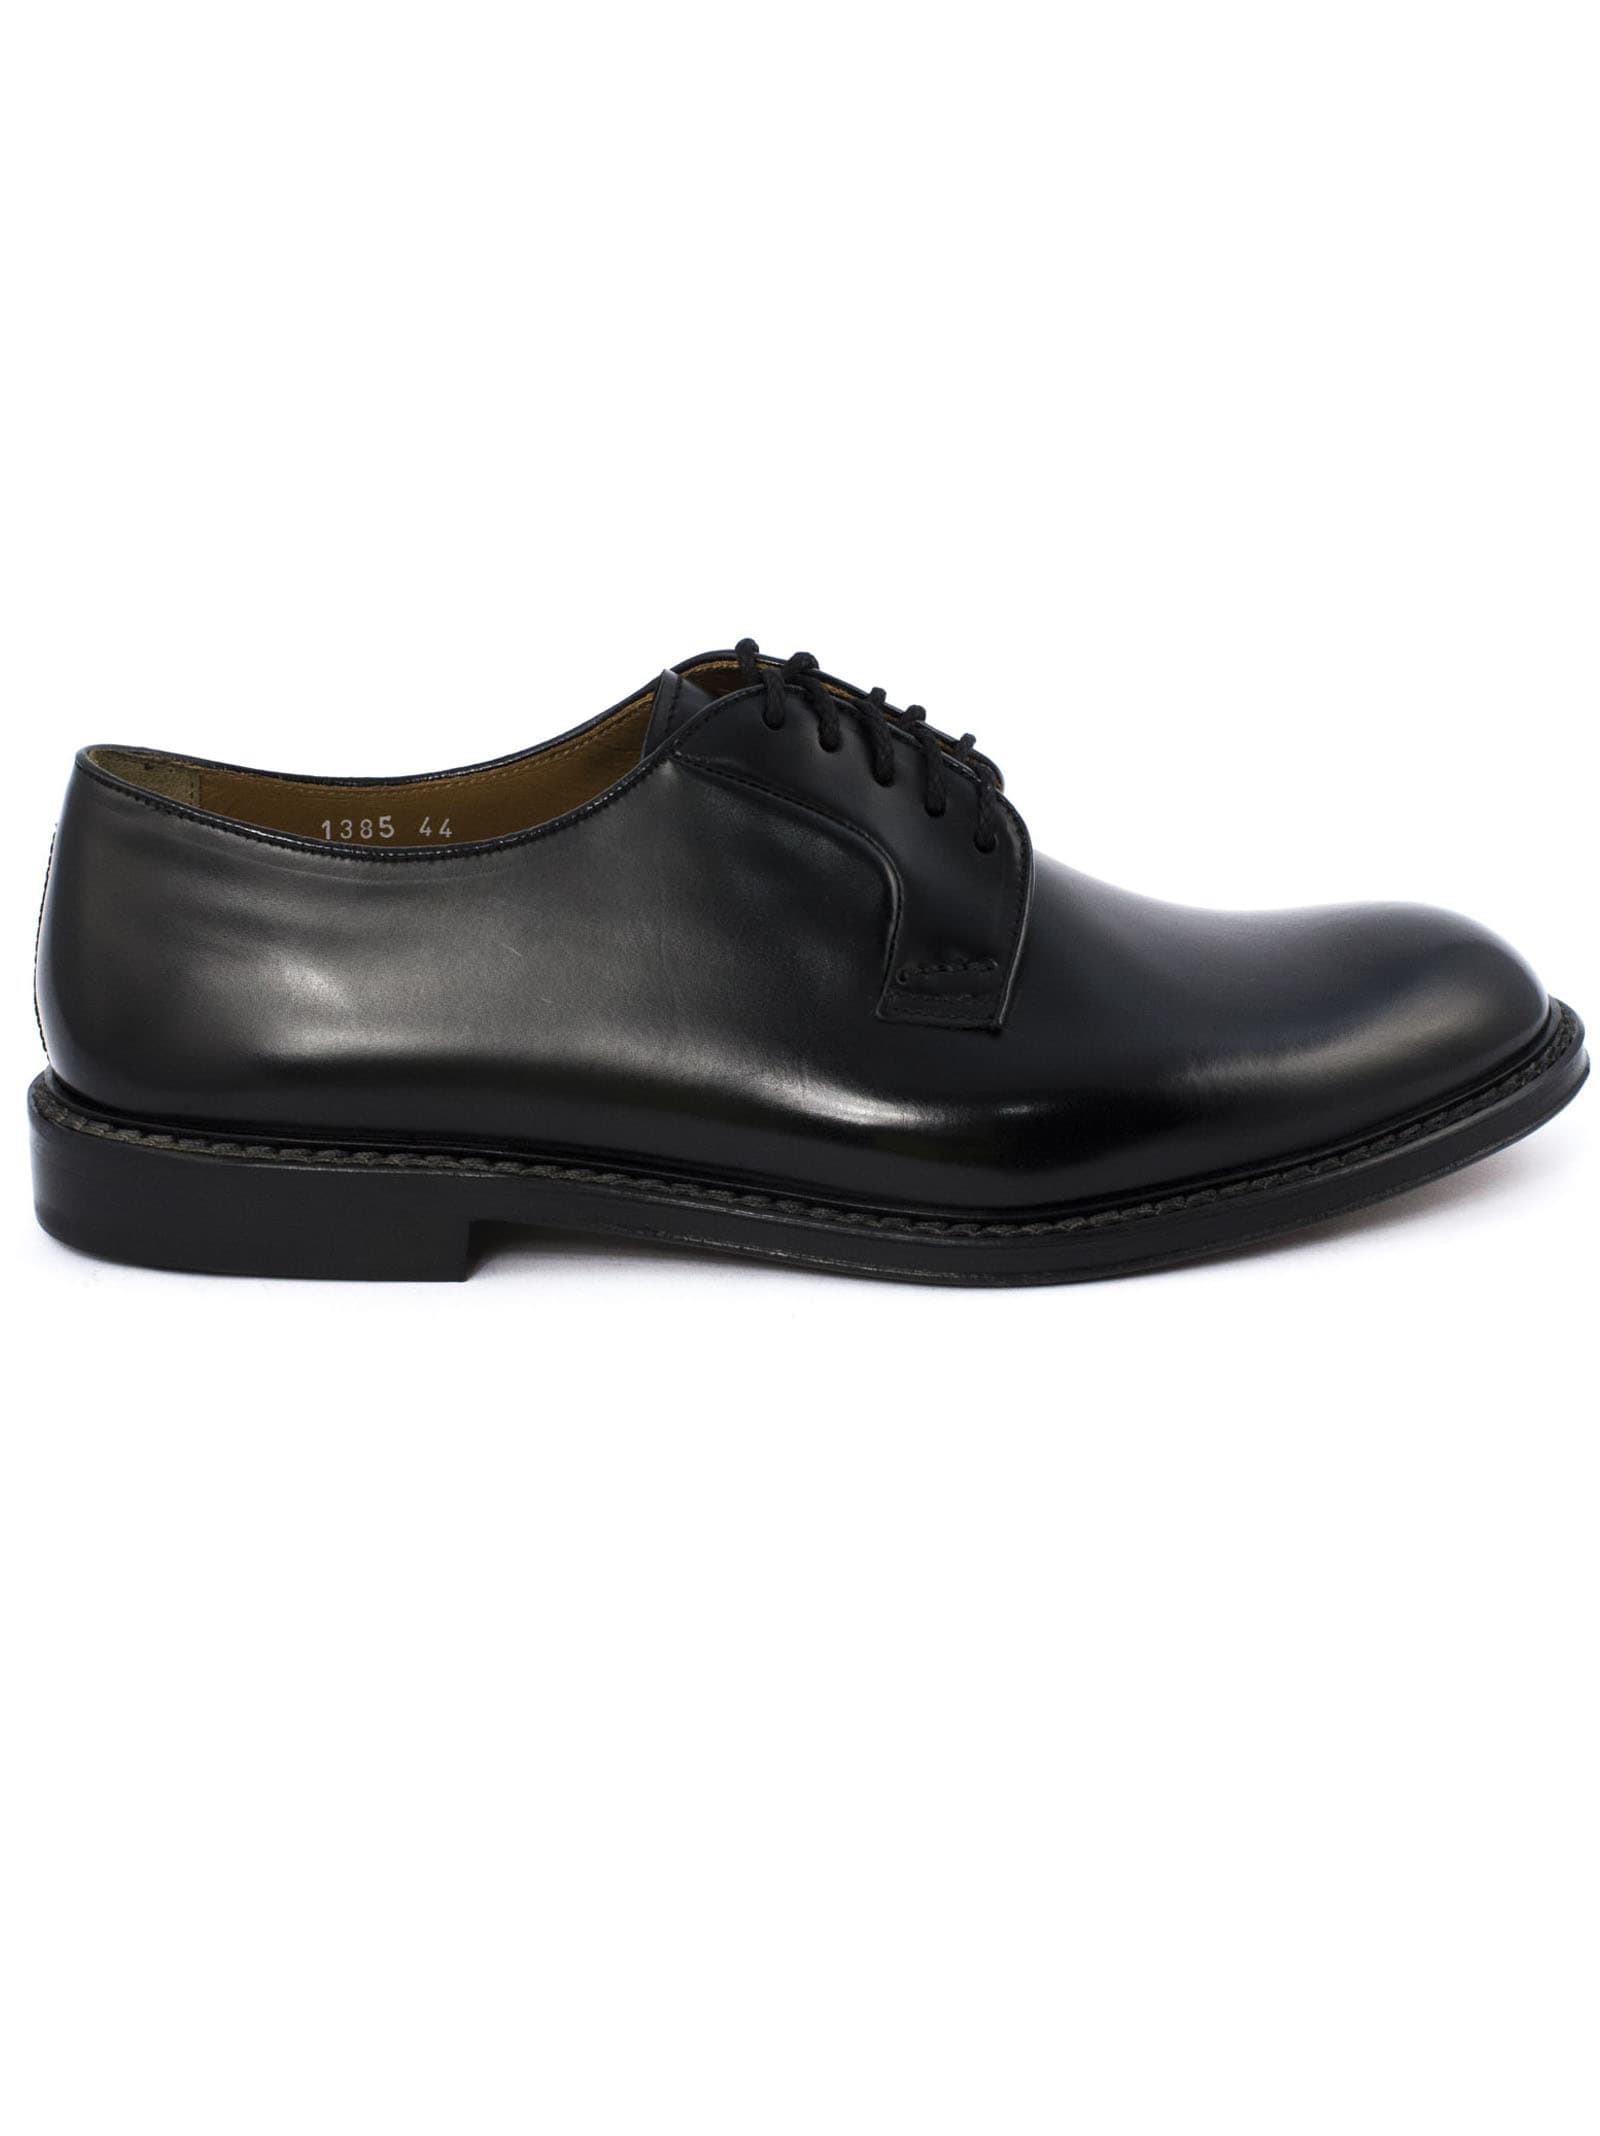 Doucal's Black Semi-glossy Leather Derby Shoes